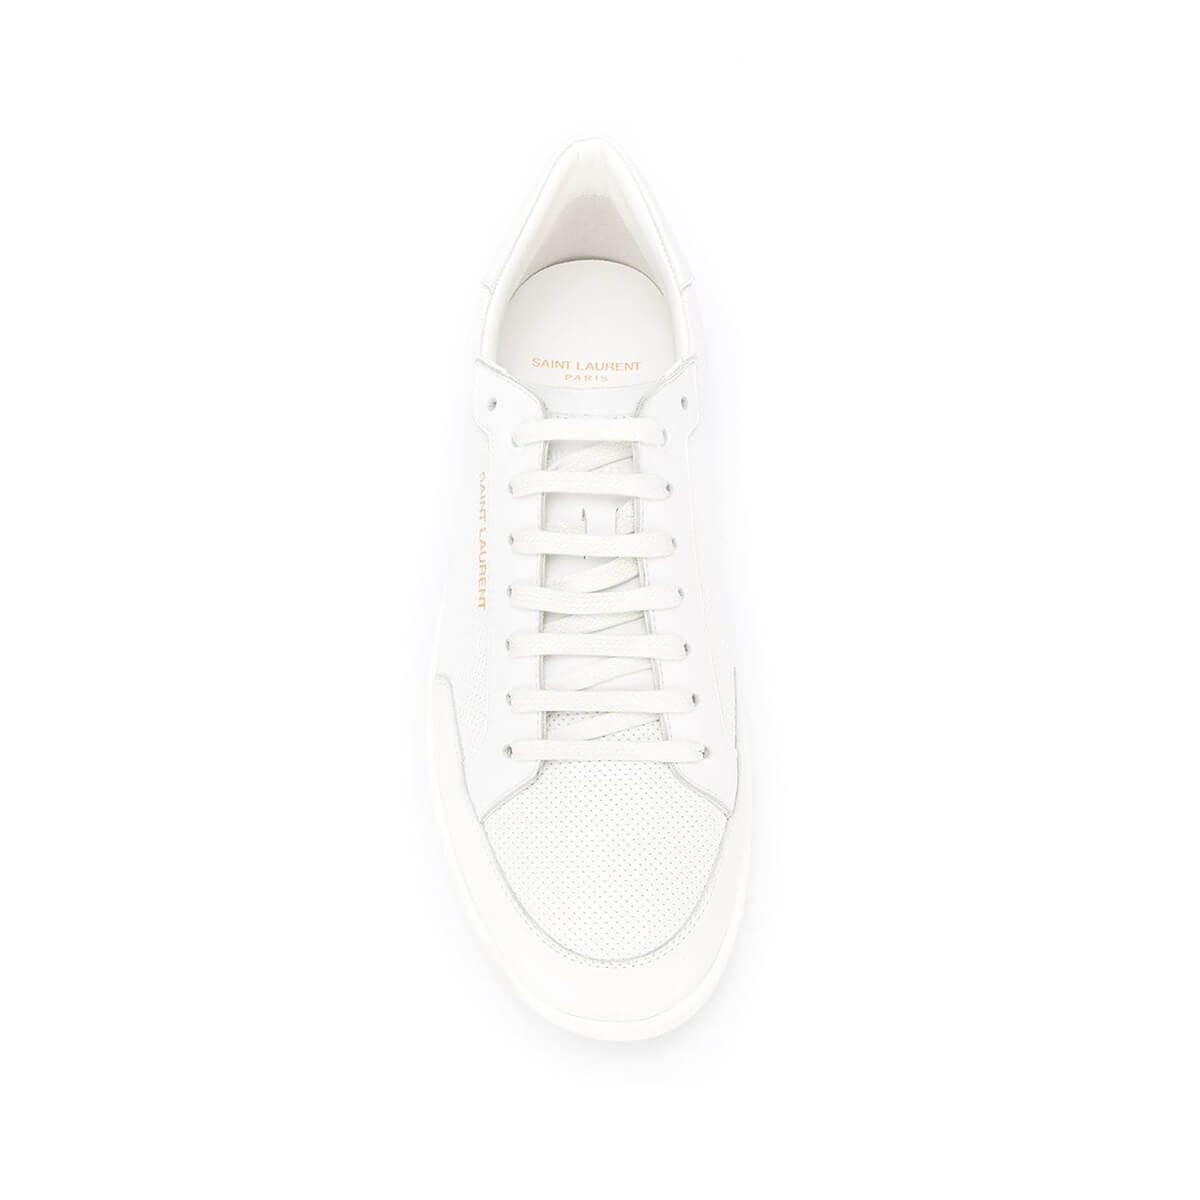 Court Classic SL/10 Perforated Sneakers